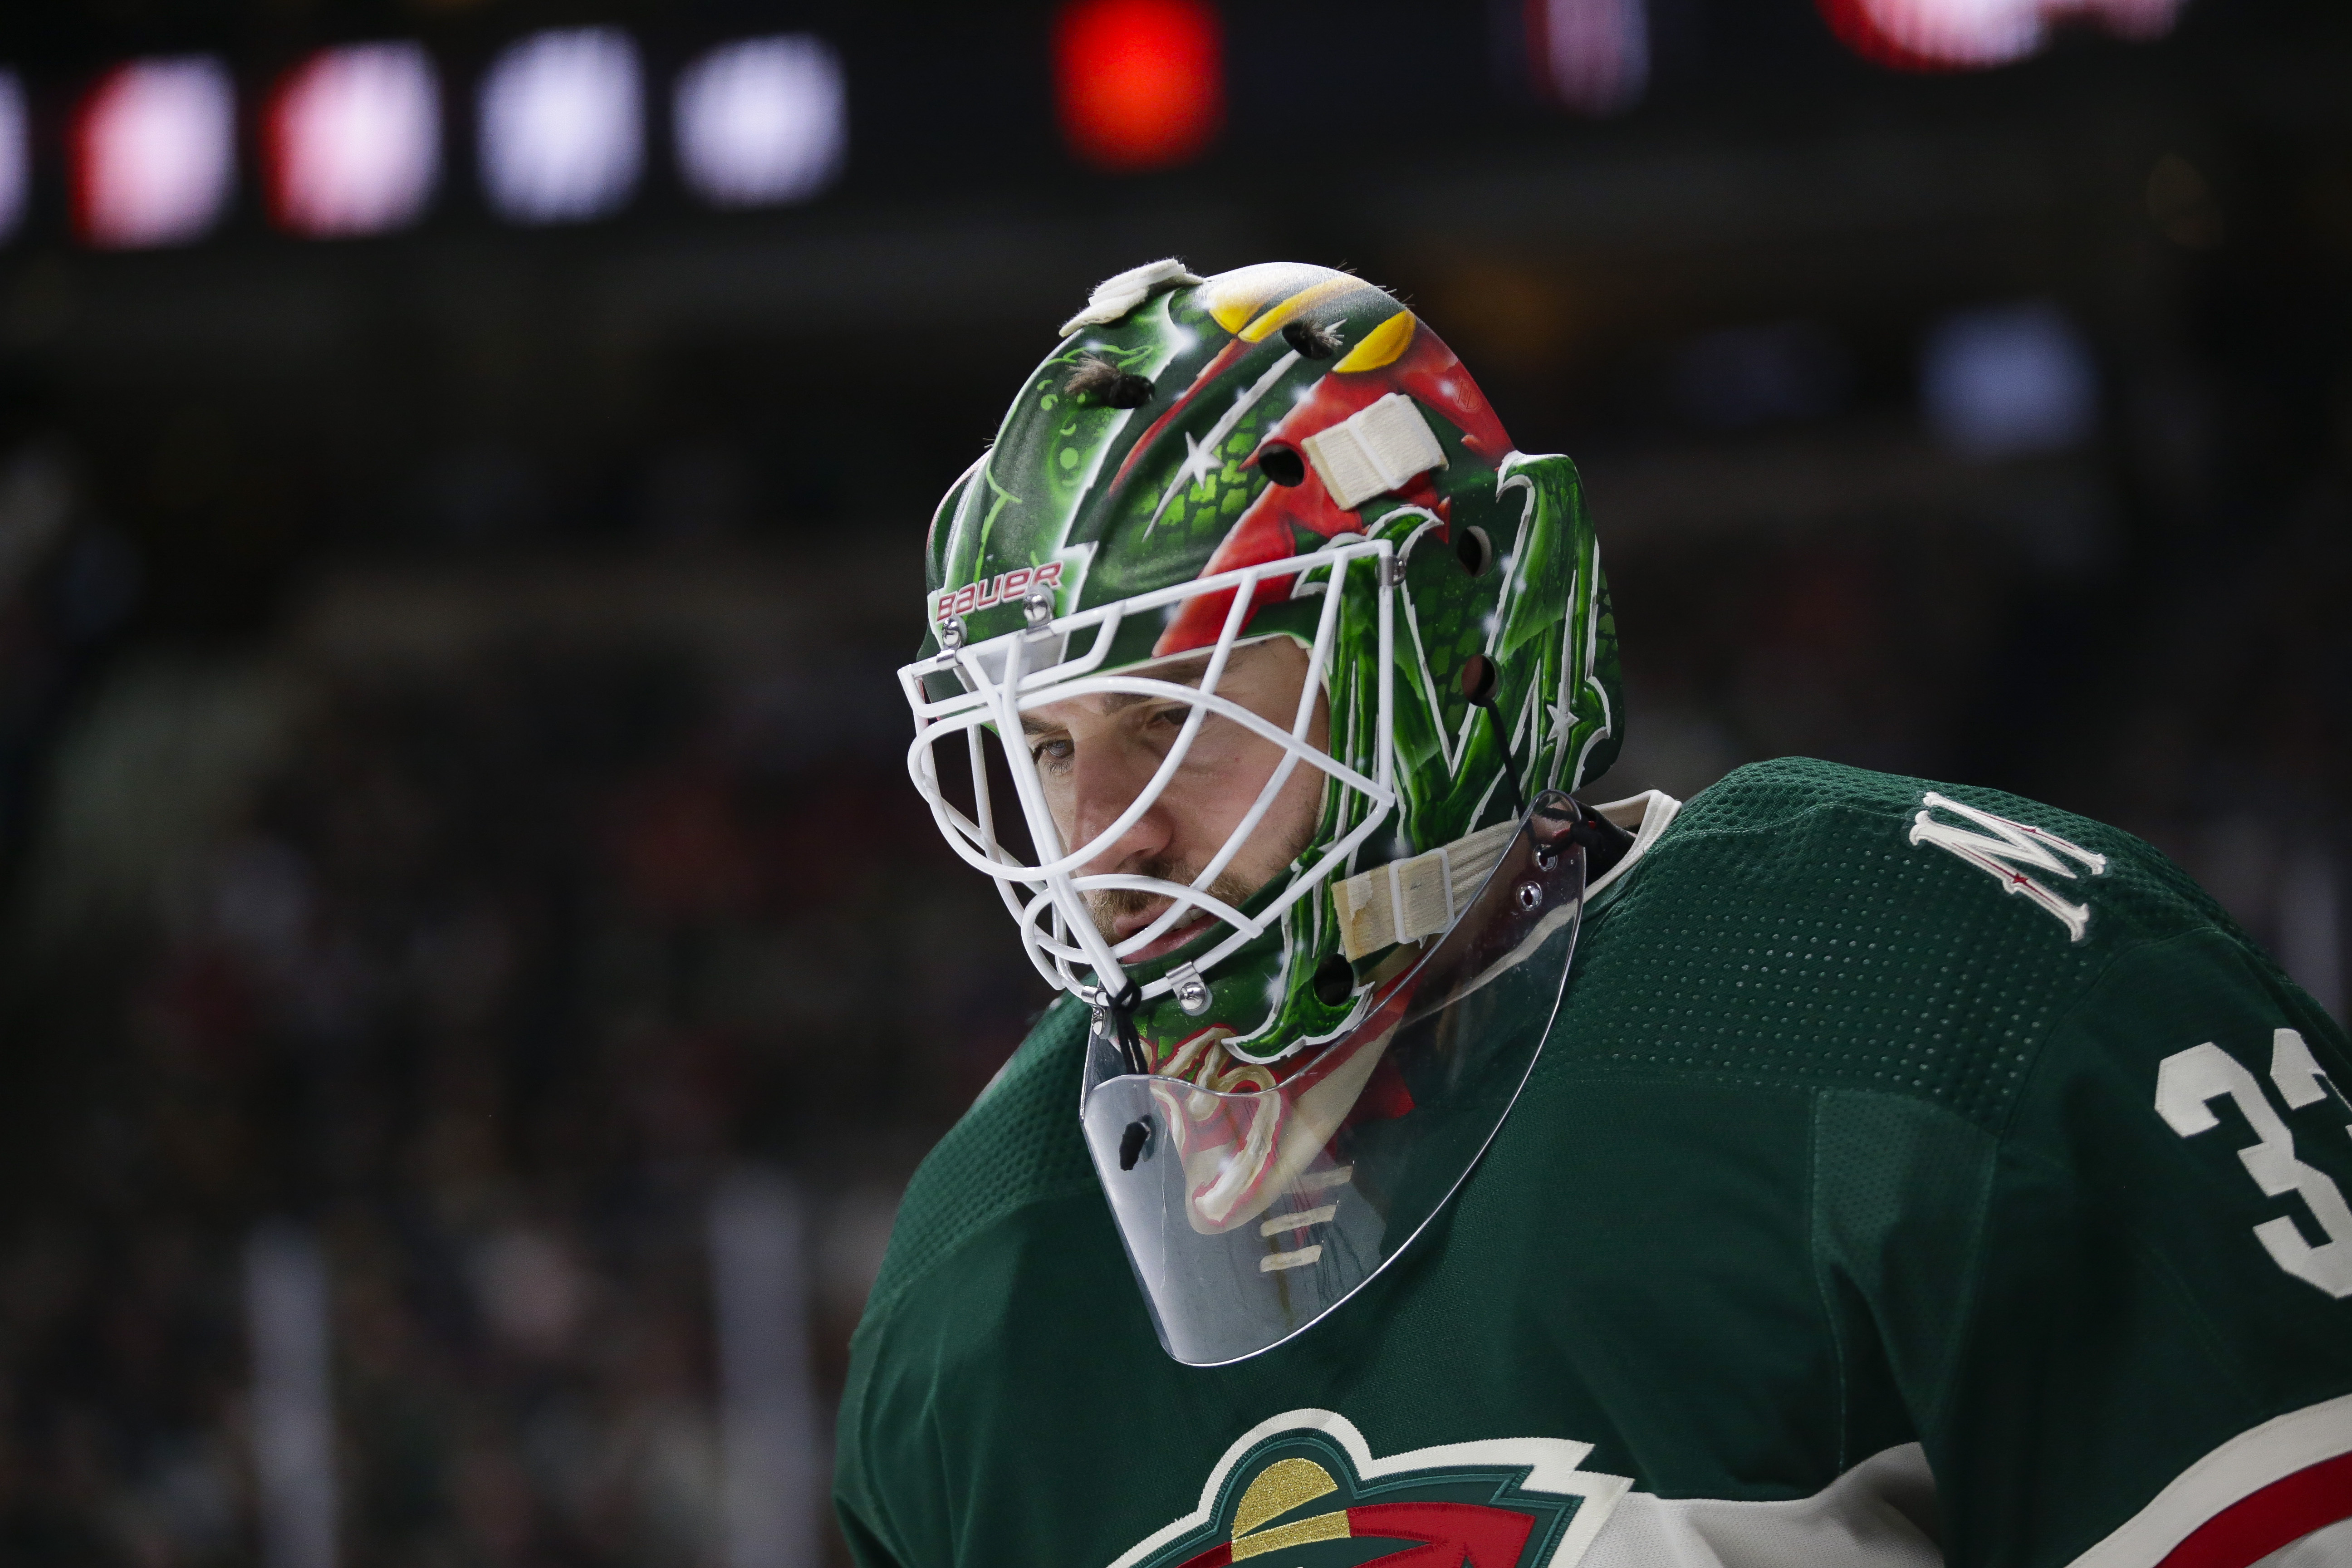 How will Wild split time in goal with Marc-Andre Fleury and Cam